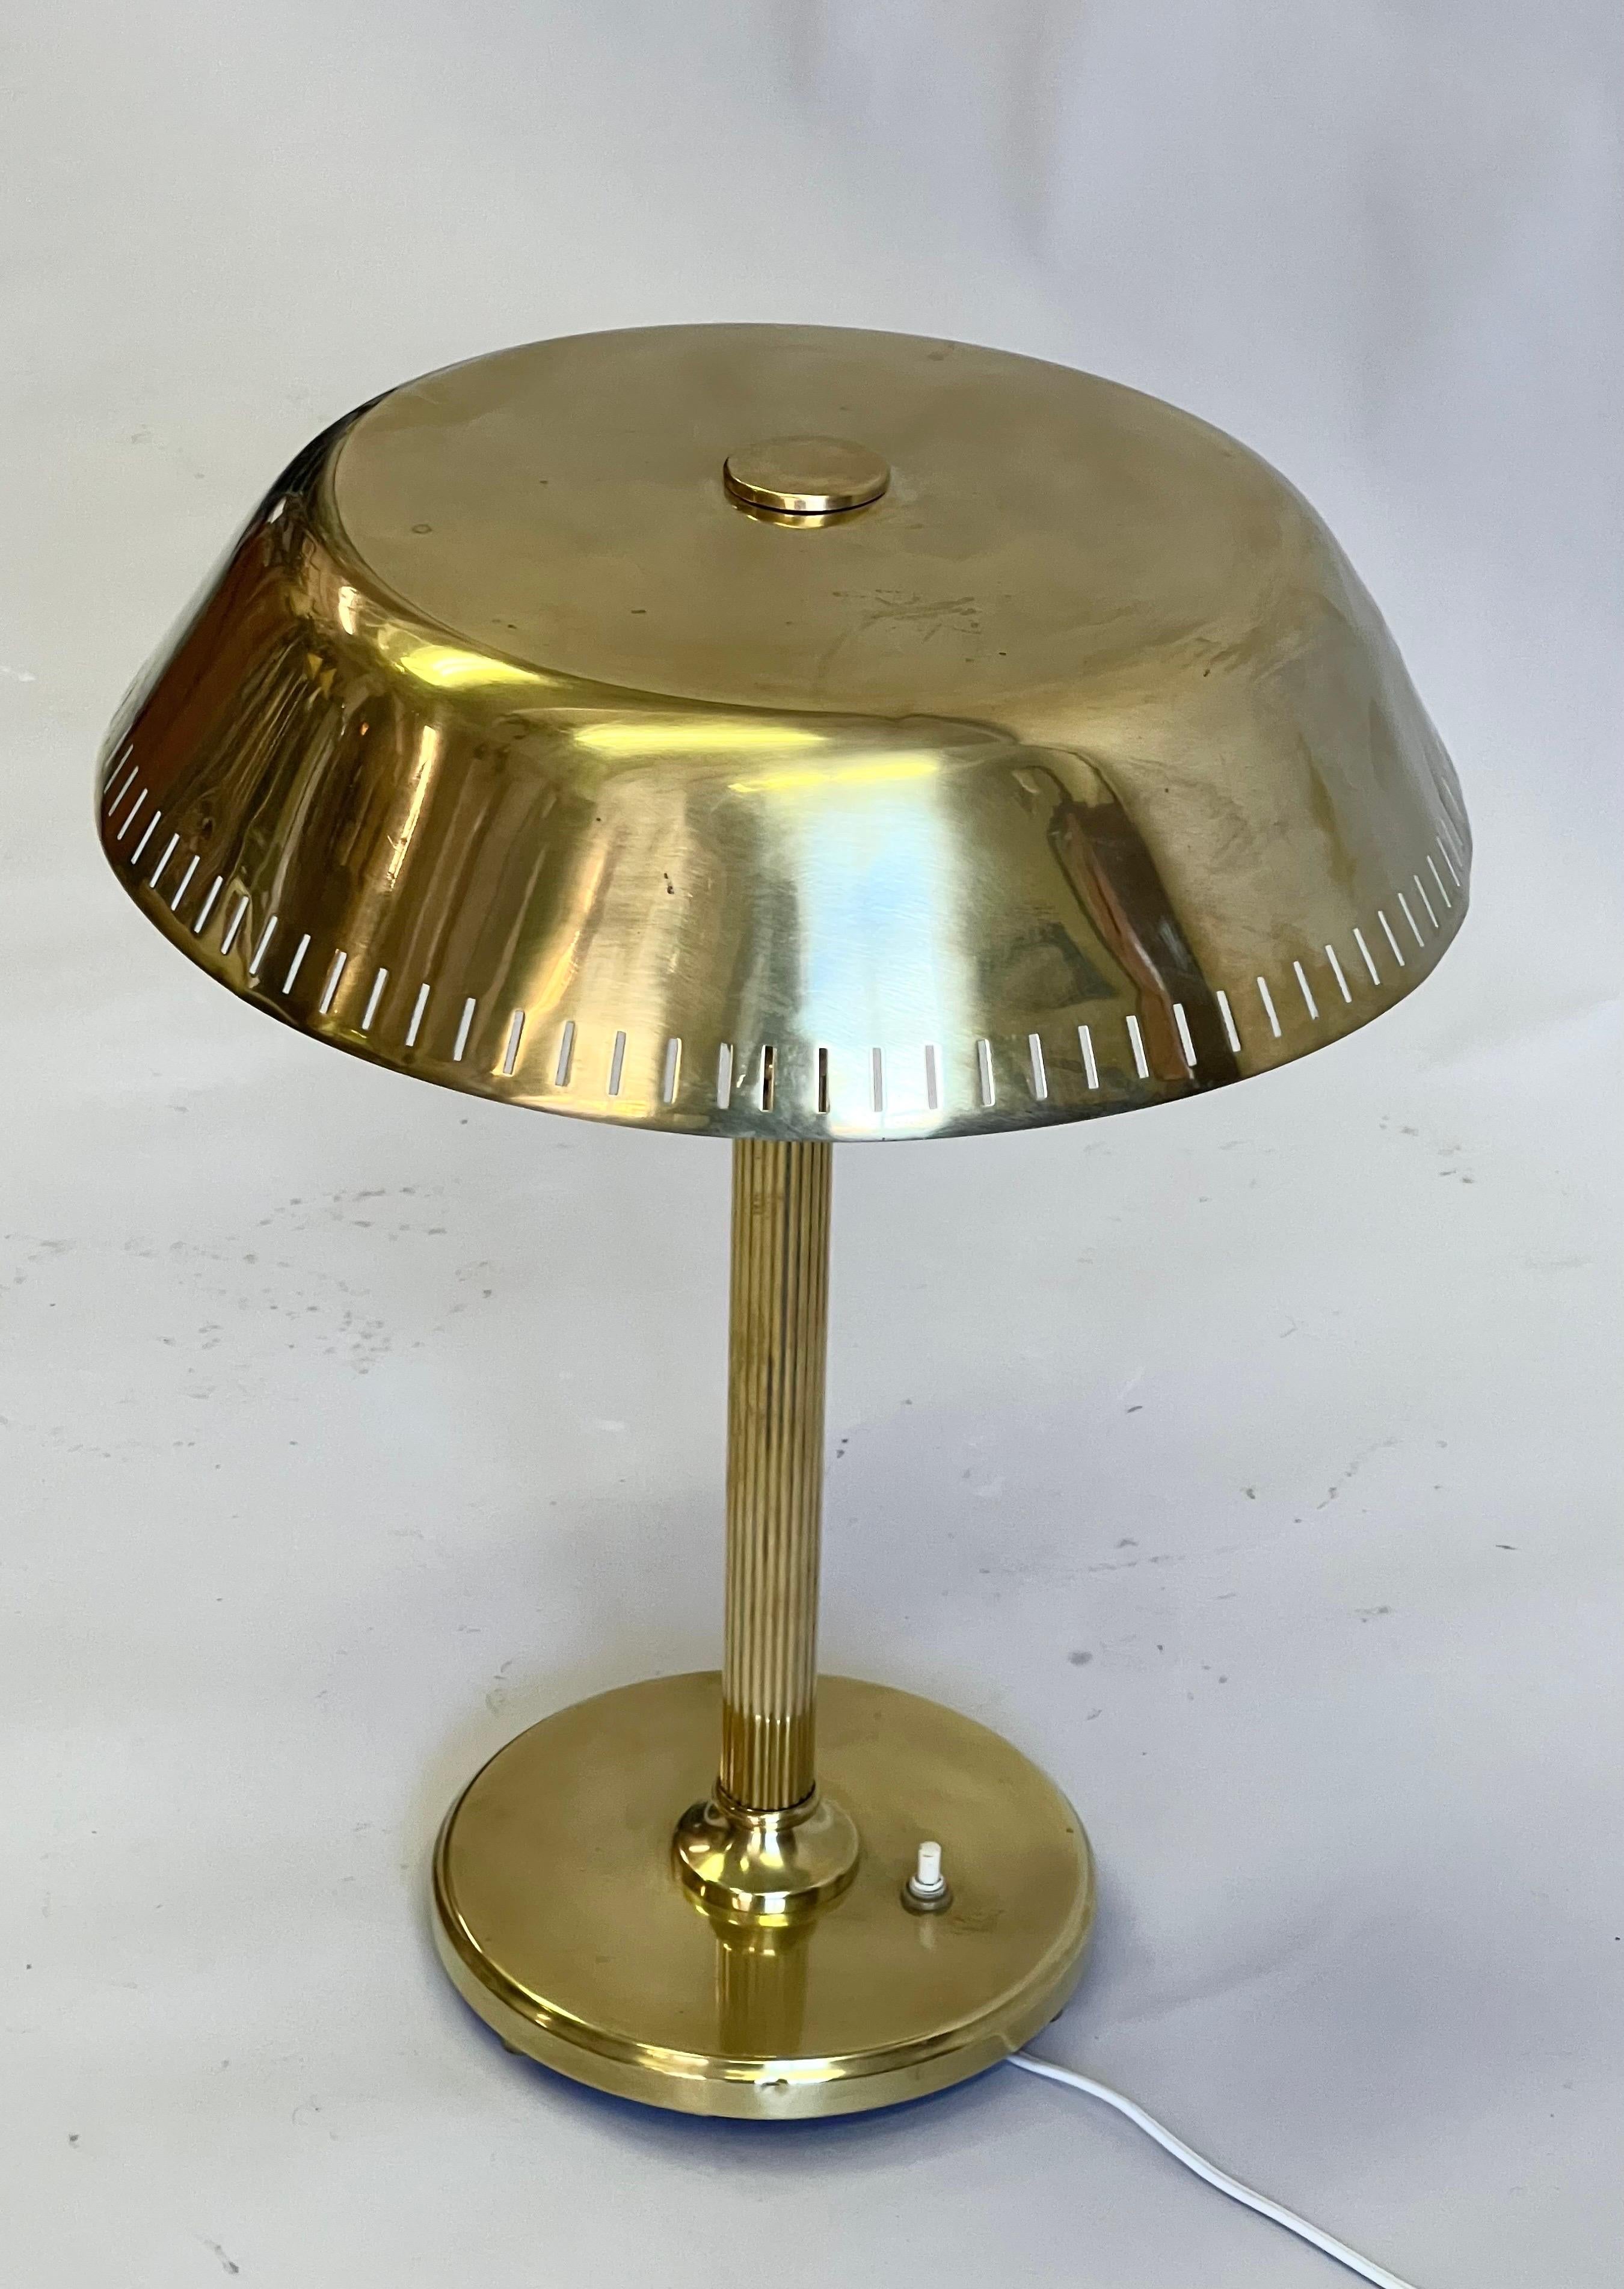 Polished Scandinavian Modern Neoclassical Brass Table / Desk Lamp Attr. to Paavo Tynell  For Sale